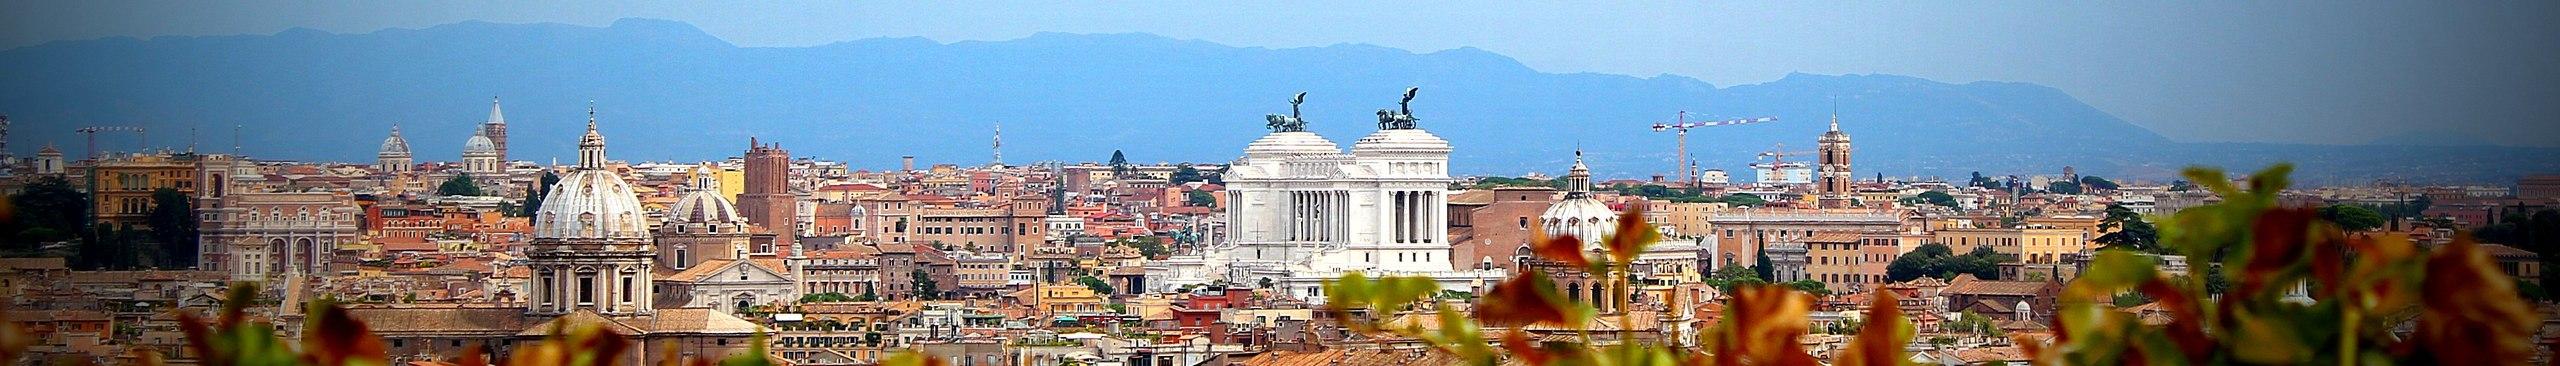 Banner image for Rome on GigsGuide